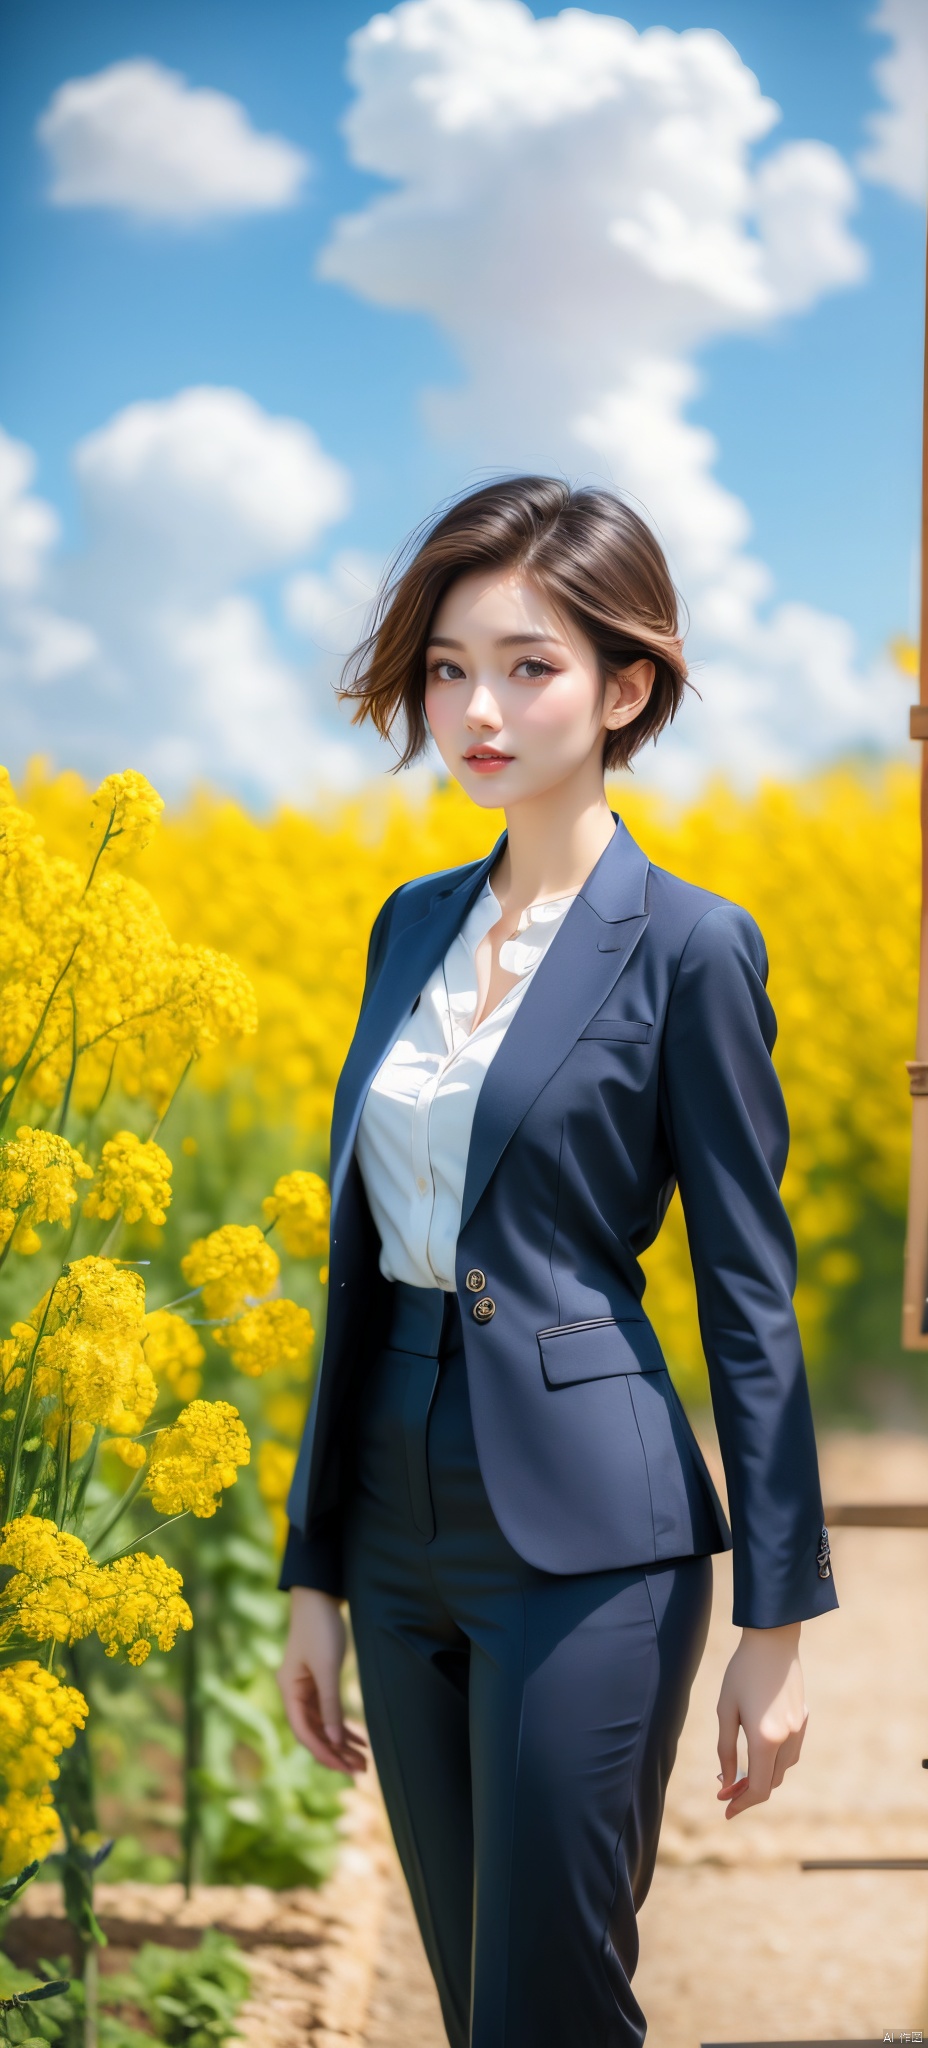  A elegant woman in a dark suit with golden short hair, standing in a field of blooming rapeseed flowers against a backdrop of blue sky and white clouds, gentle breeze blowing, causing her clothes corner and hair to flutter slightly, high quality full HD picture, art painting by famous artist., Light master